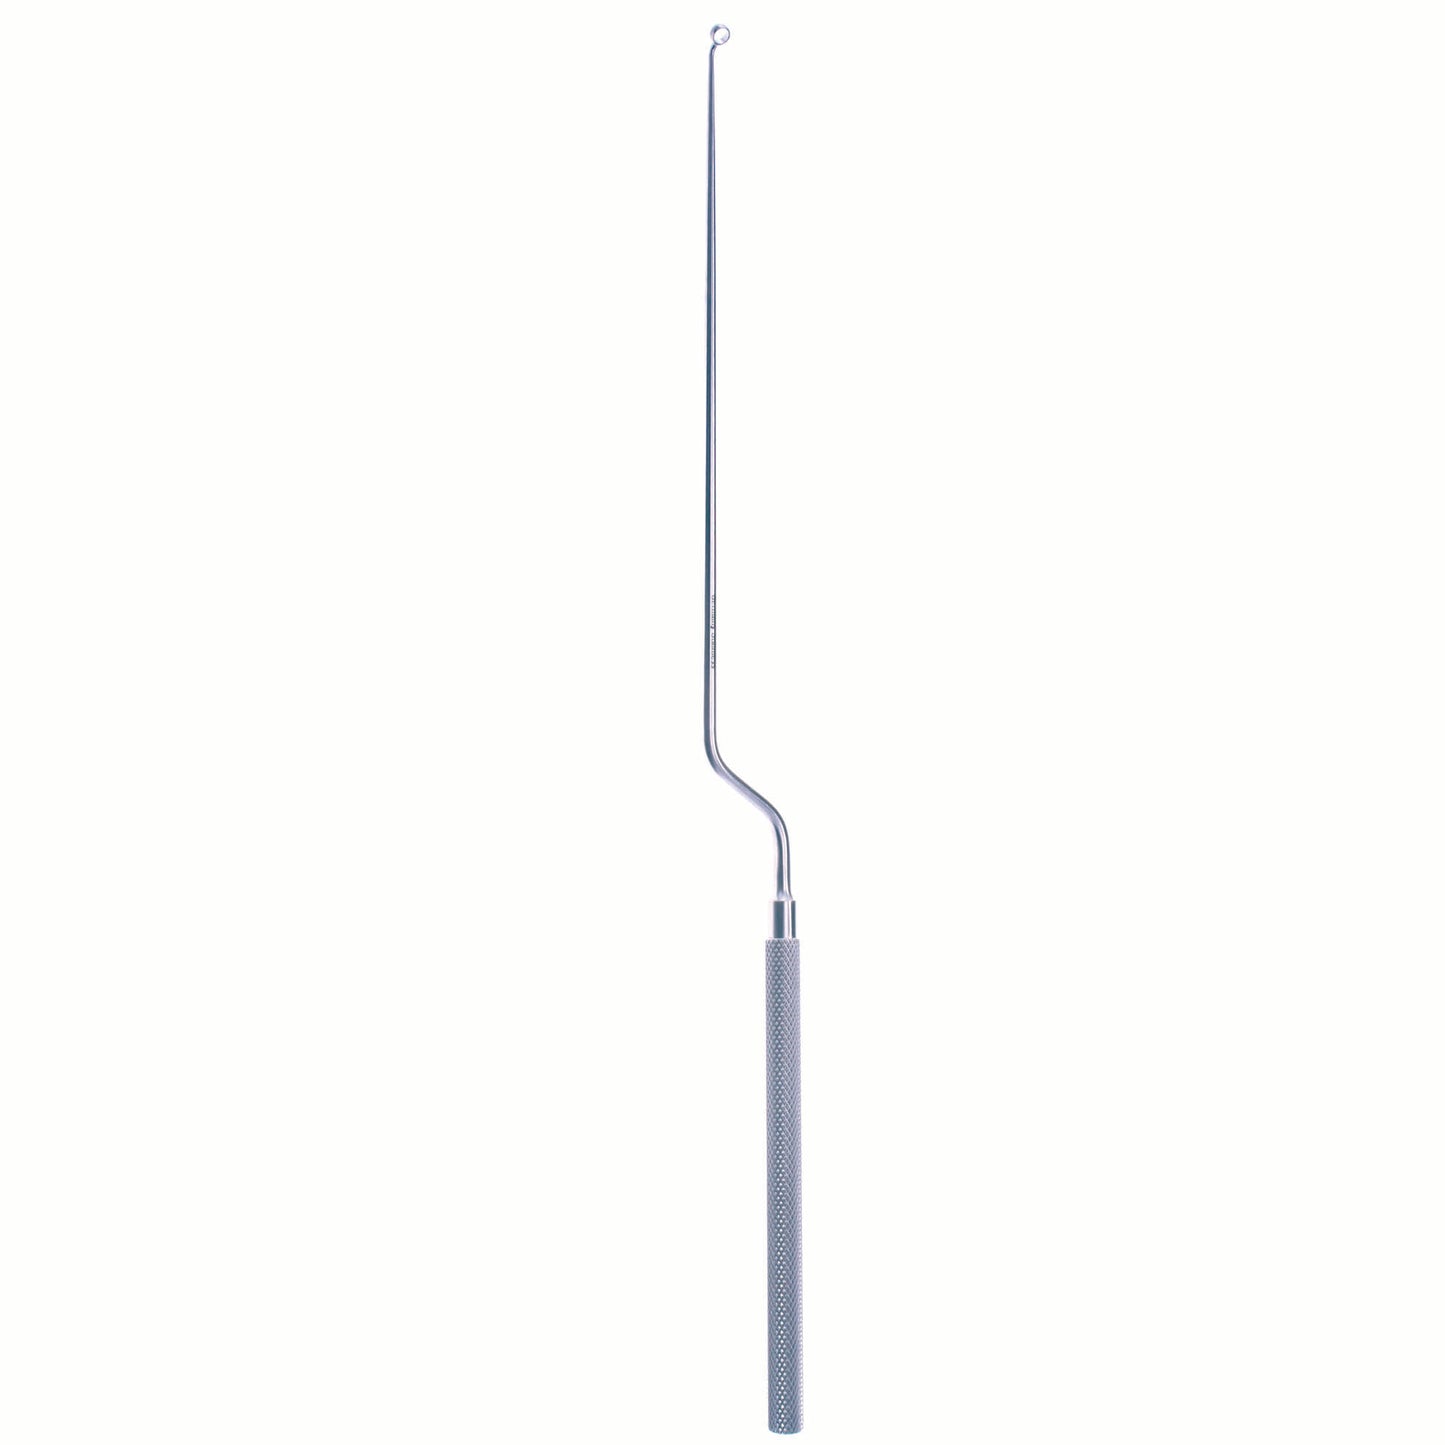 Curette 3mm 45° angled rt